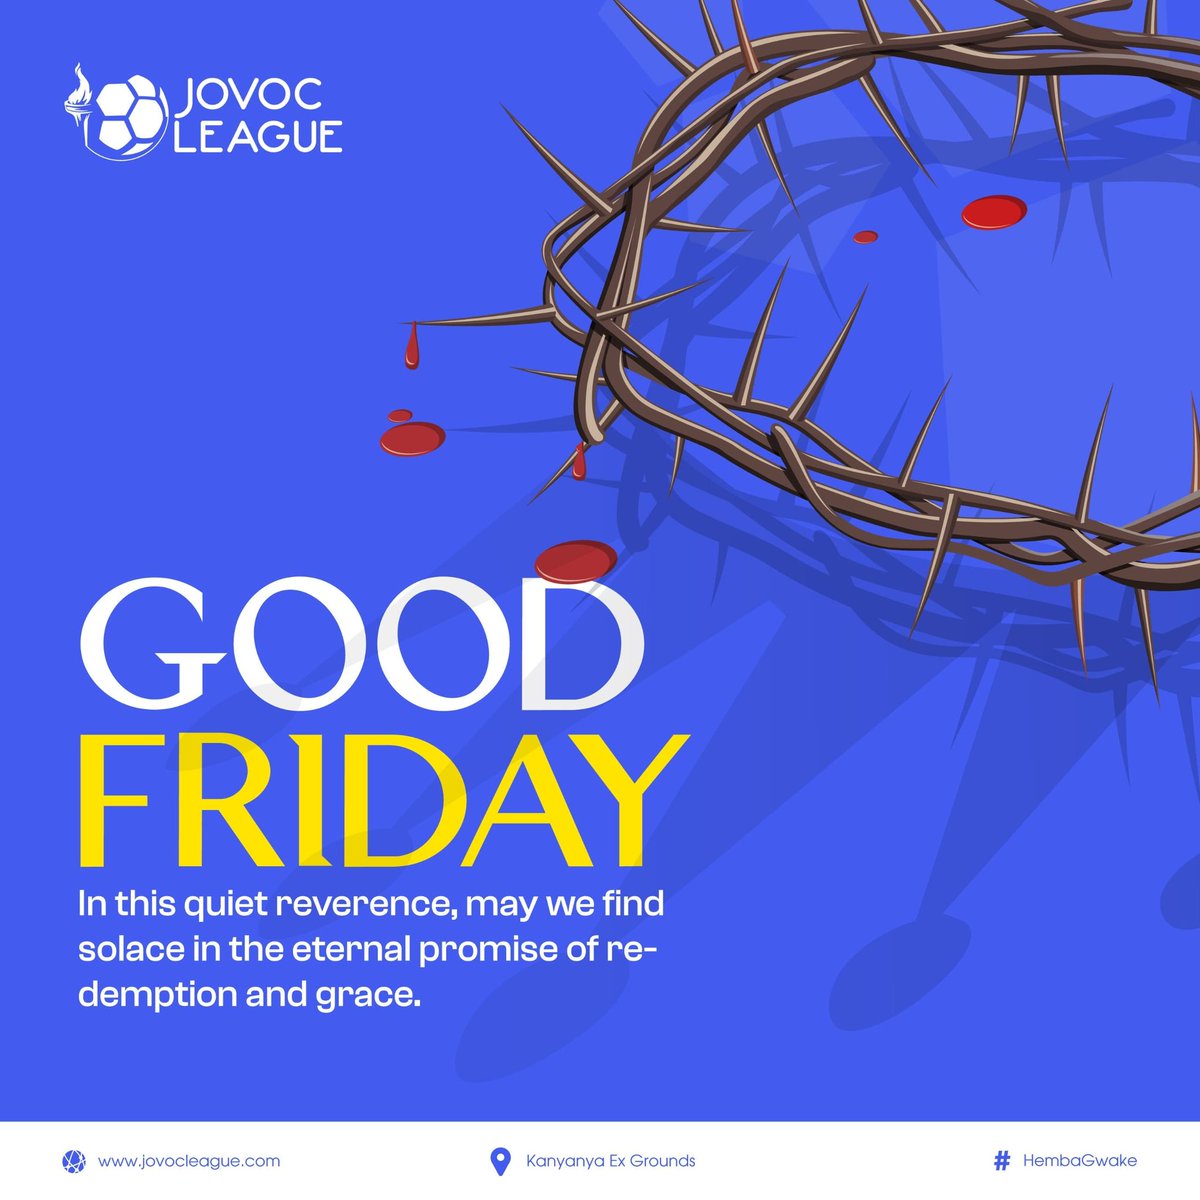 Join the Jovoc League in honoring the solemnity and significance of Good Friday. Together, let's pause, reflect, and embrace the essence of renewal and faith. #JovocLeague #GoodFriday24